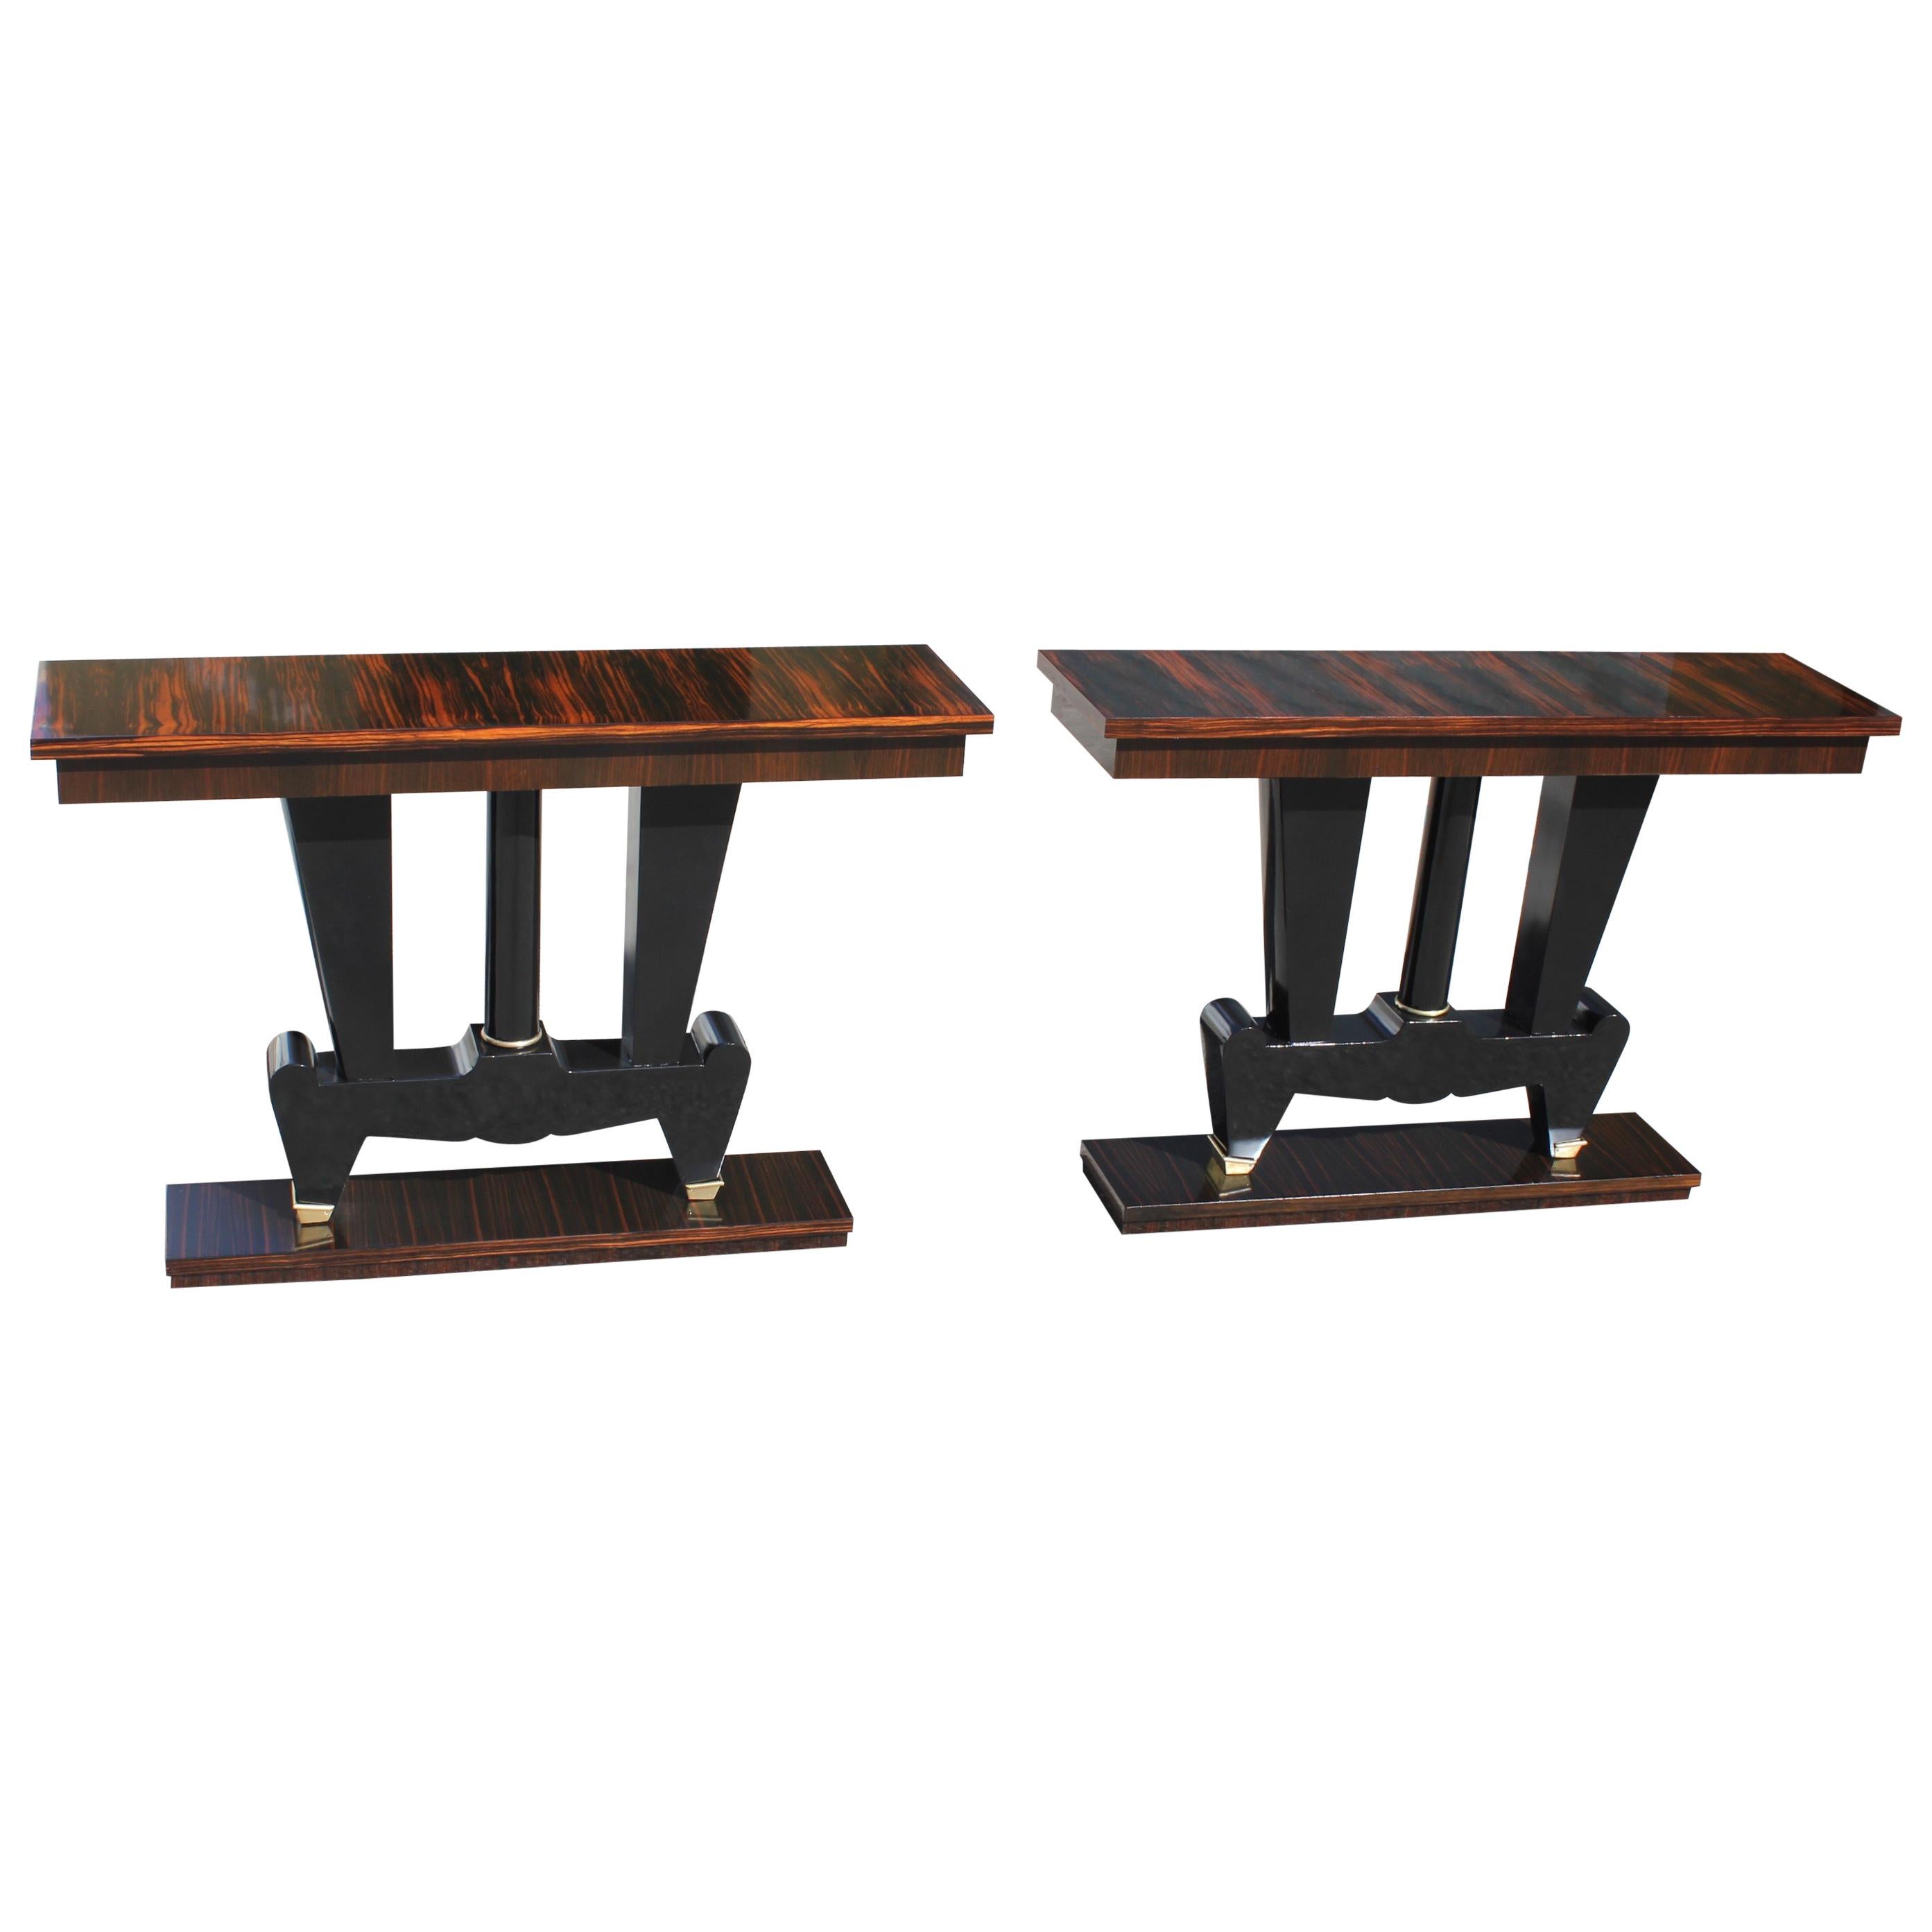 Spectacular Pair of French Art Deco Macassar Ebony Console Tables, circa 1940s